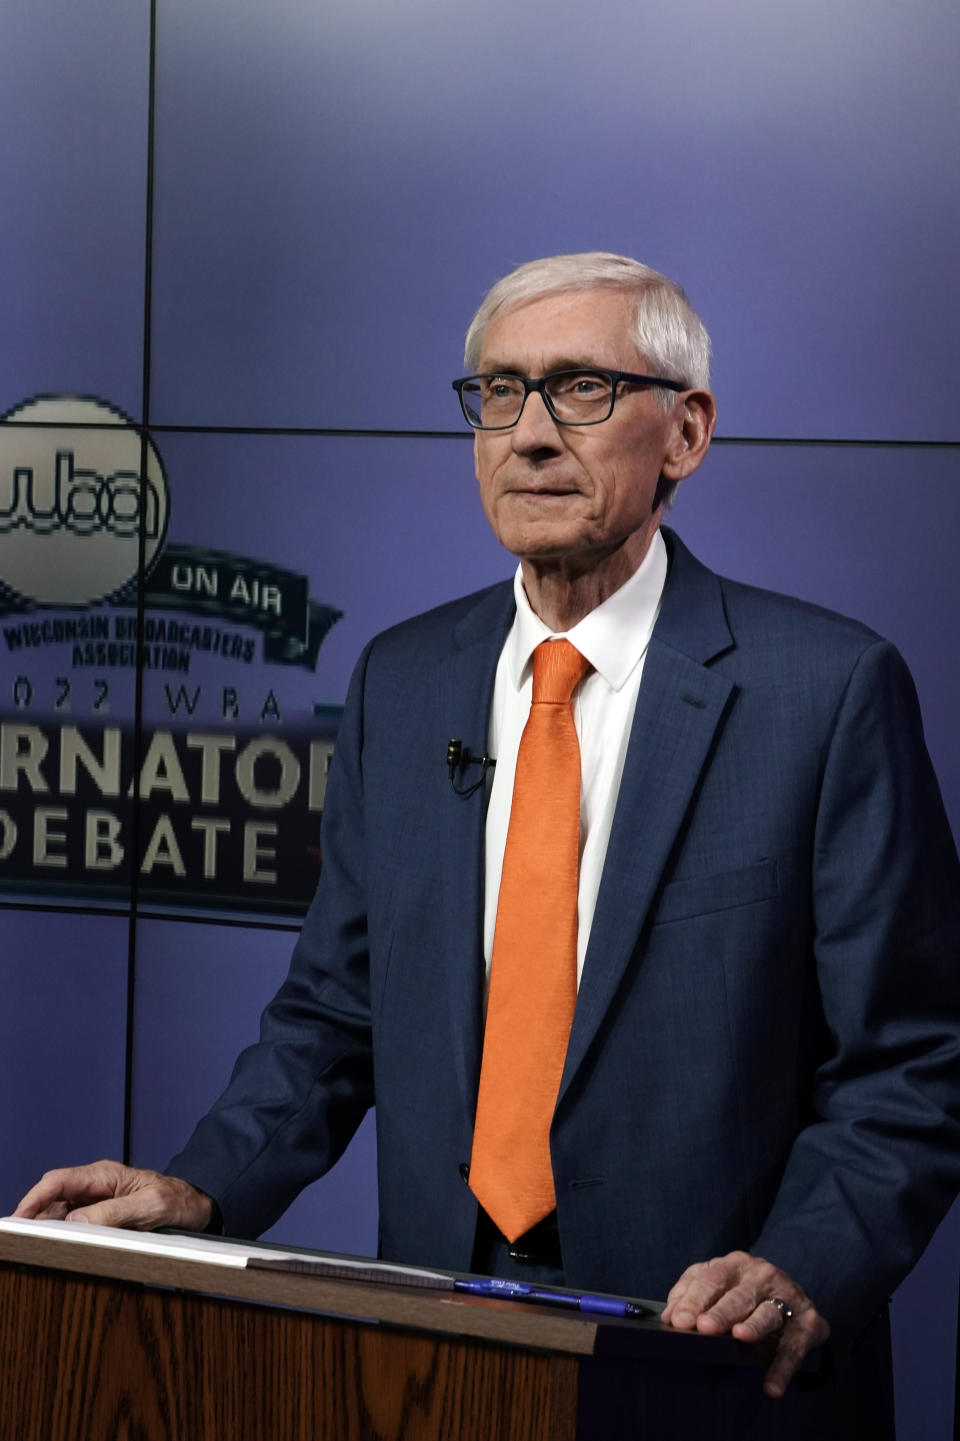 Democratic Gov. Tony Evers prepares for a televised gubernatorial debate, Friday, Oct. 14, 2022, in Madison, Wis. (AP Photo/Morry Gash)